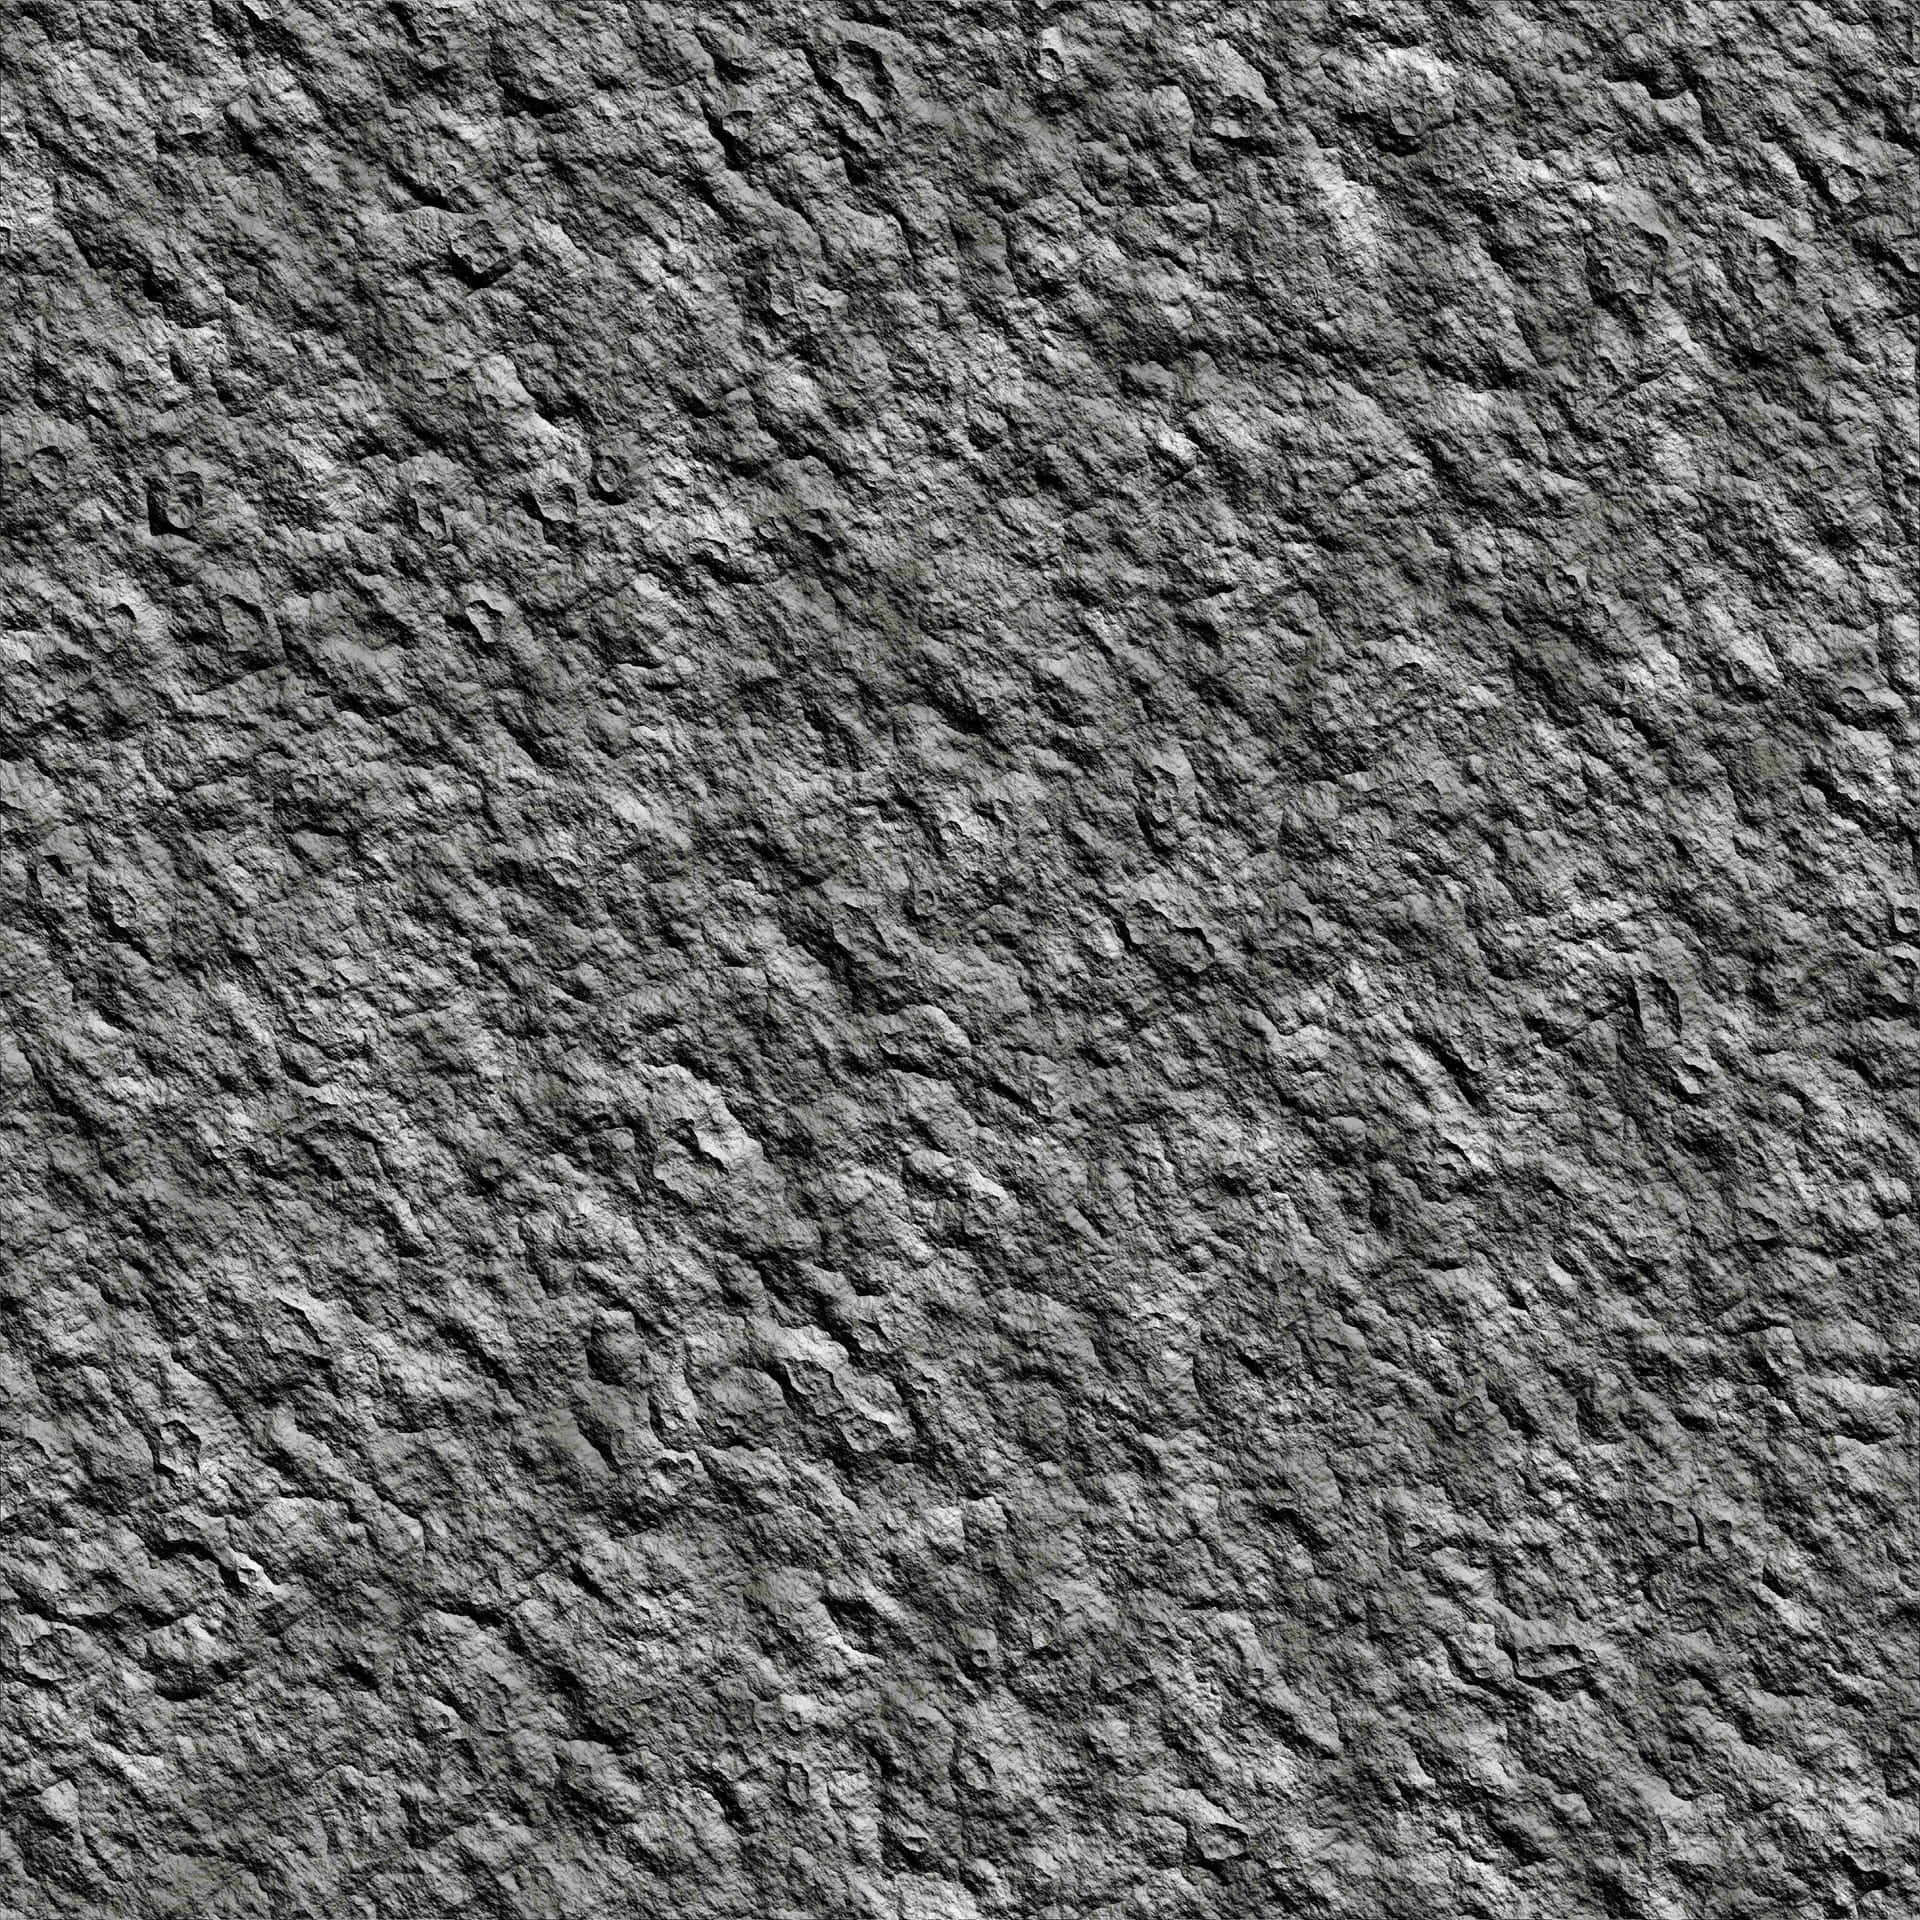 Rough Slate Gray Textured Background